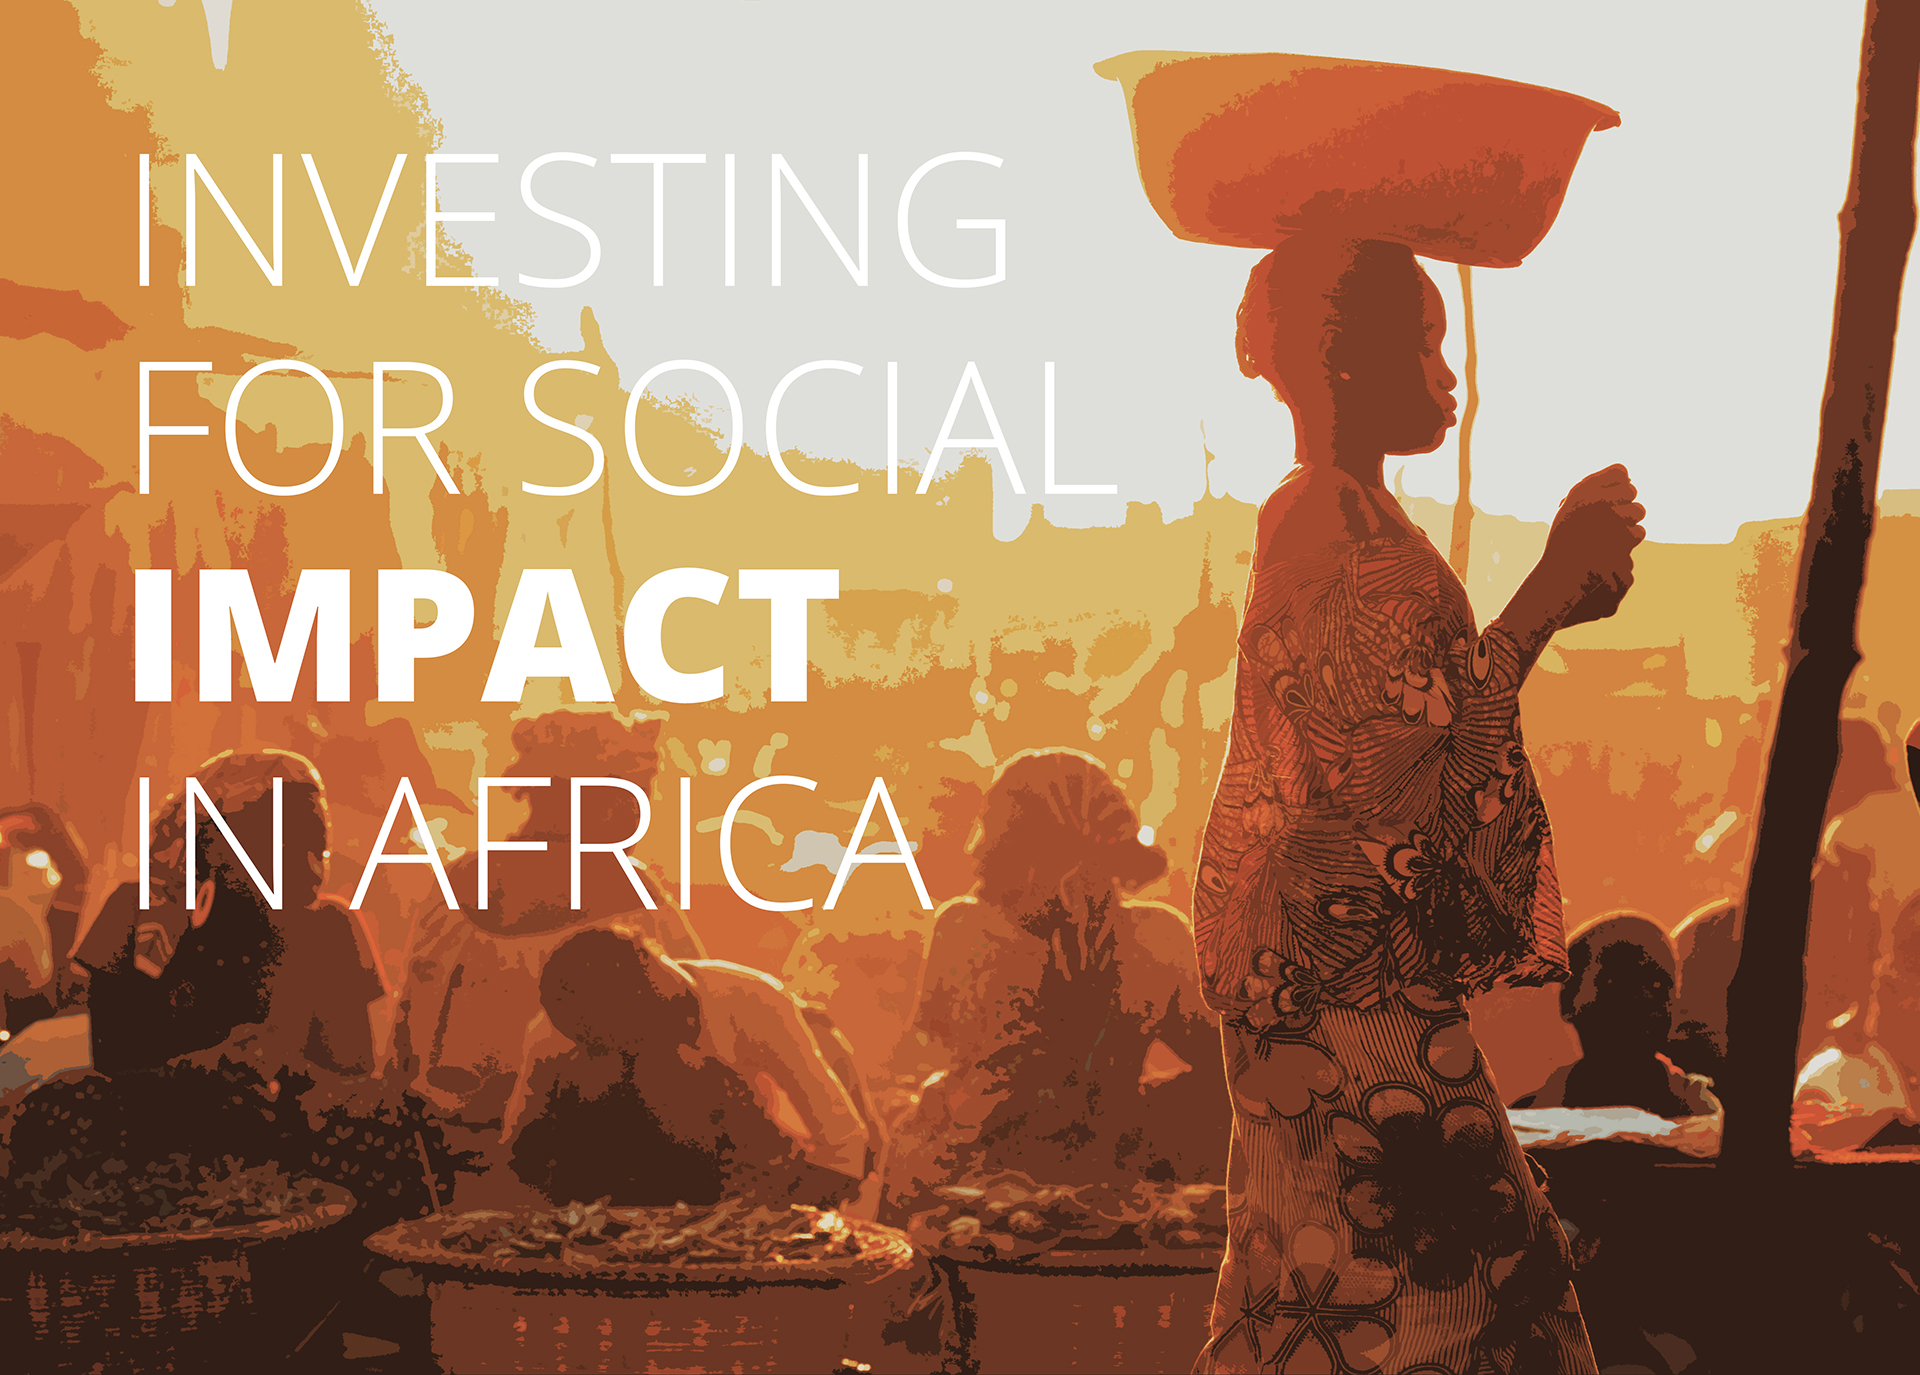 Investing for social impact in Africa